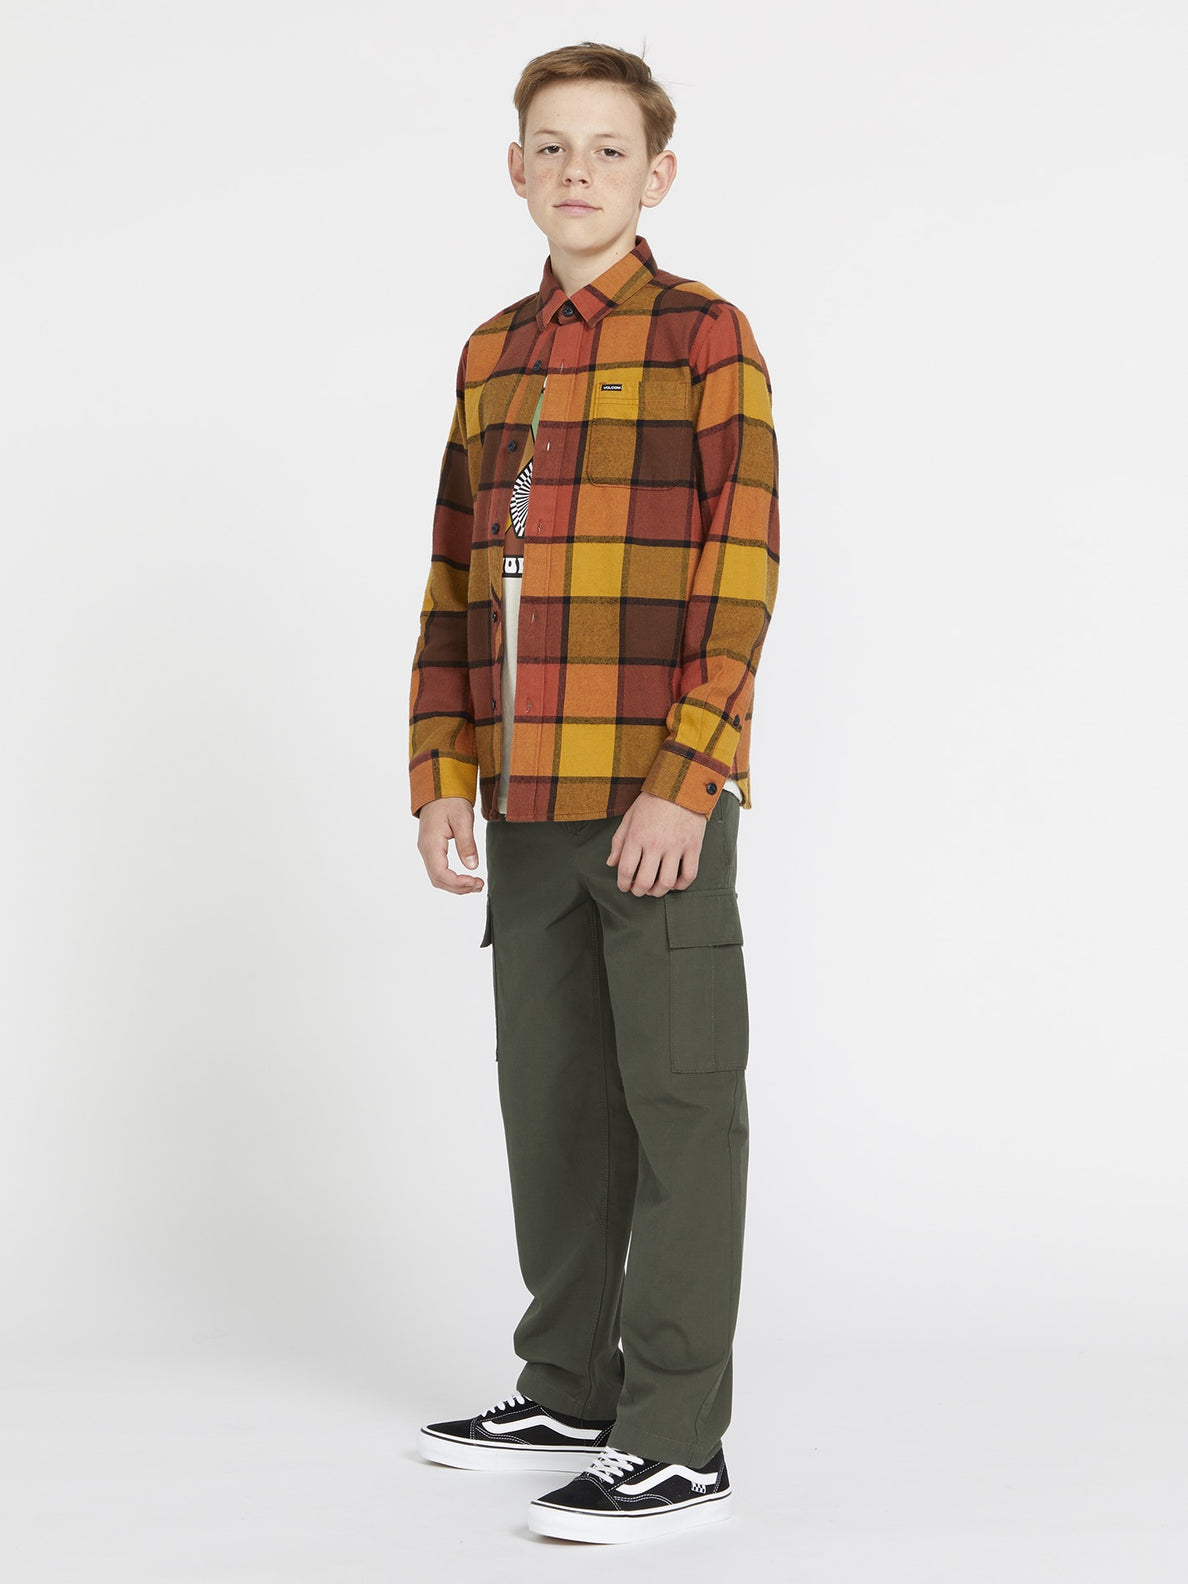 Boys Youth March Cargo Elastic Waist Pant - Squadron Green